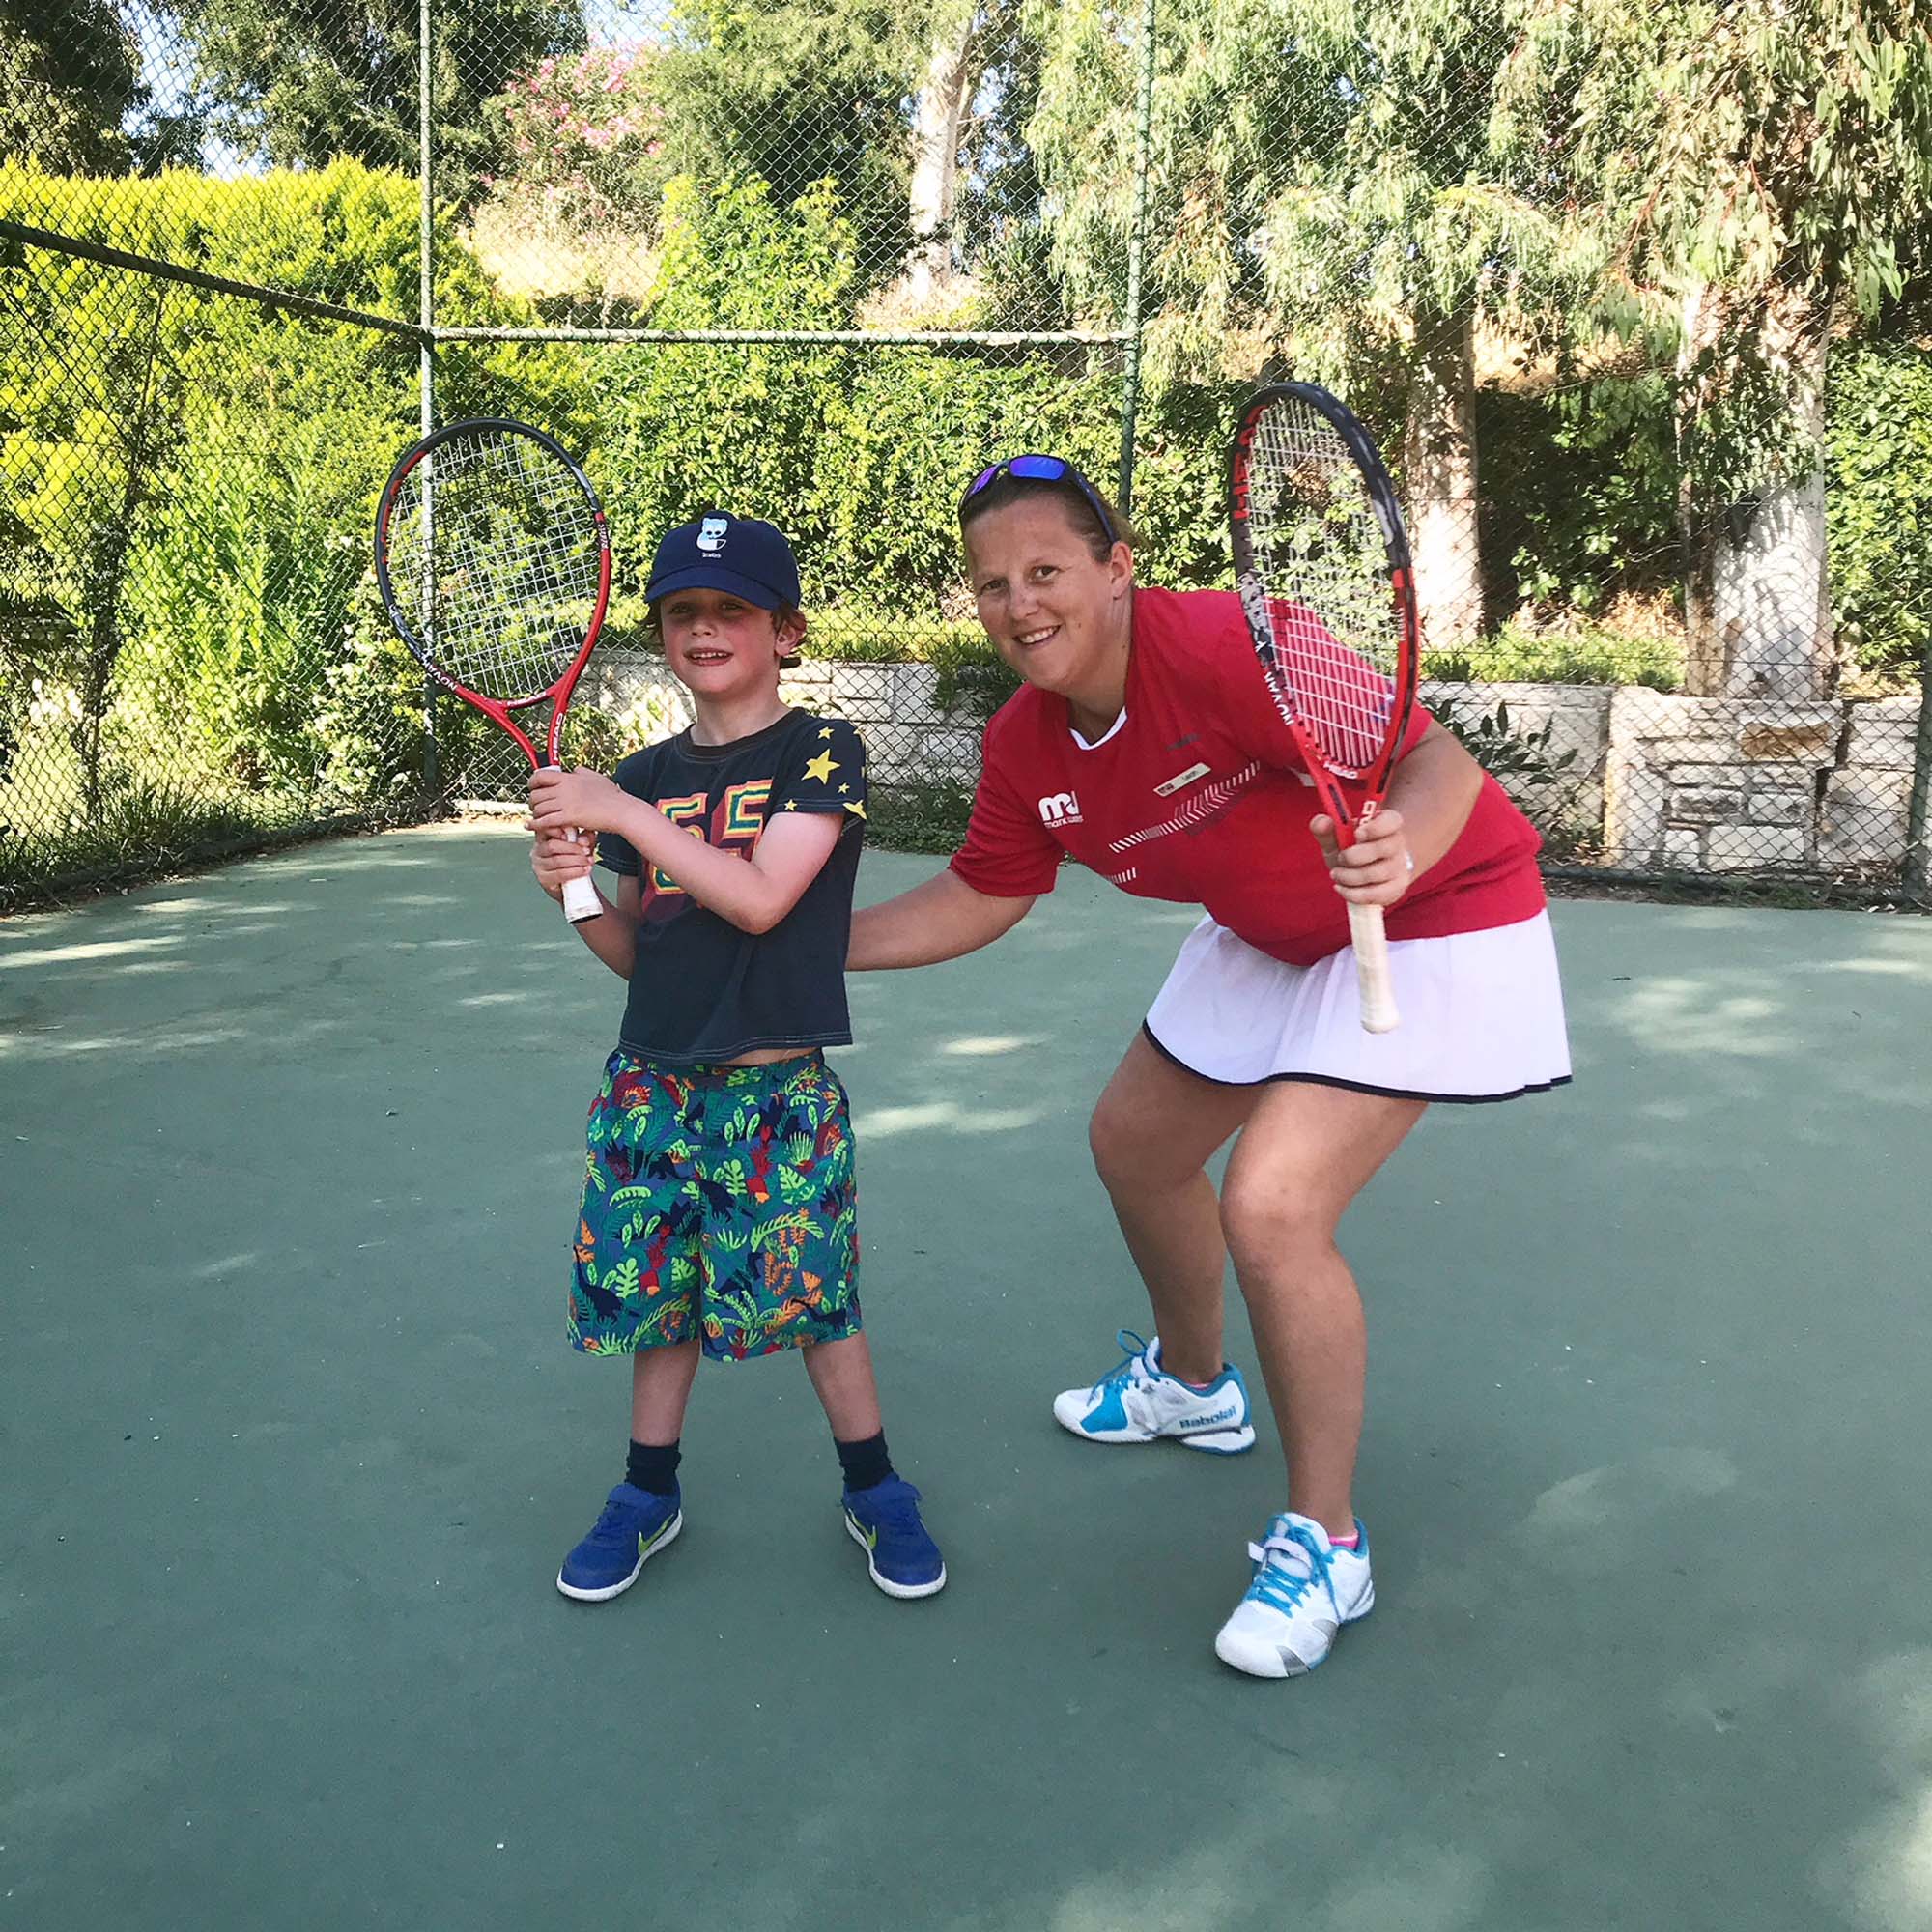 Private tennis lesson with lovely Coach Leah